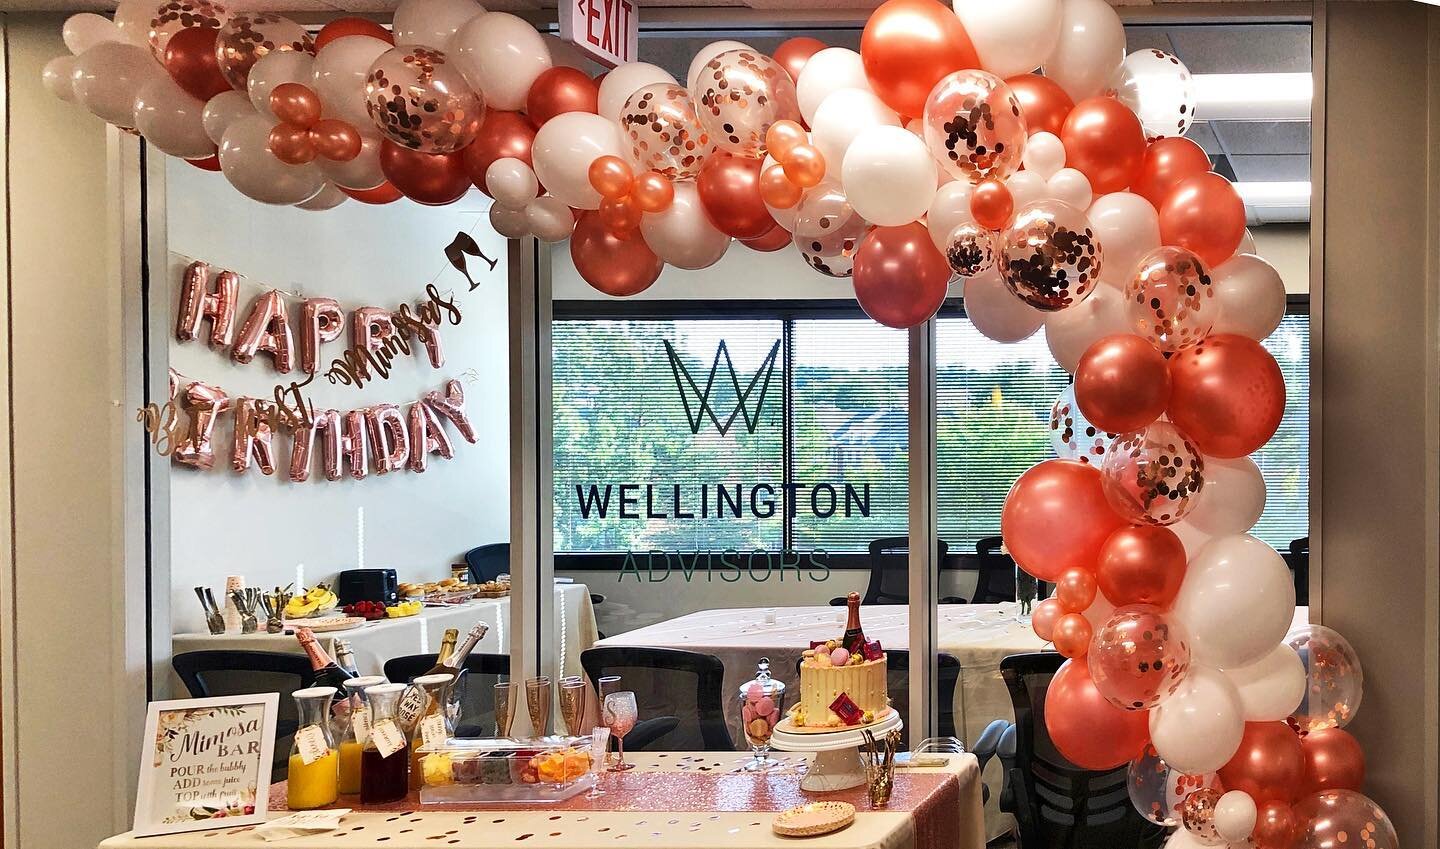 This office knows how to party! They surprised their boss with a Mimosa Bar for her Birthday🍾

#balloons #raleighnc #raleighballoons #ncevents #balloongarland #confettiballoons #mimosabar #balloondecor #birthdayballoons #balloondeliveryraleigh #rdu 